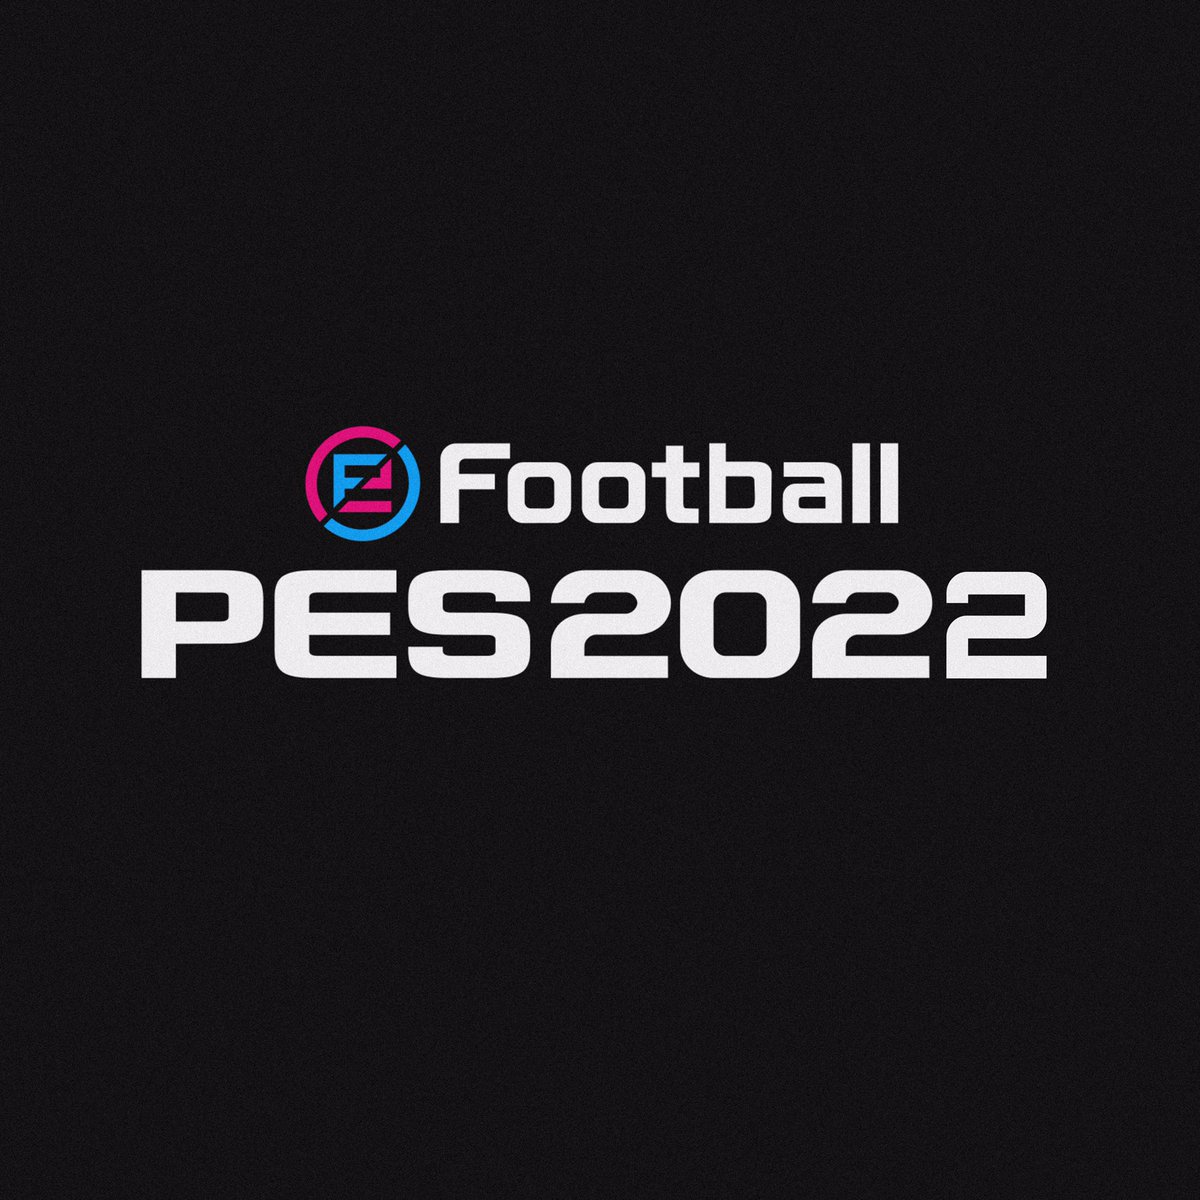 PES 2022 Demo Version Is Available, It Is Still Under Development